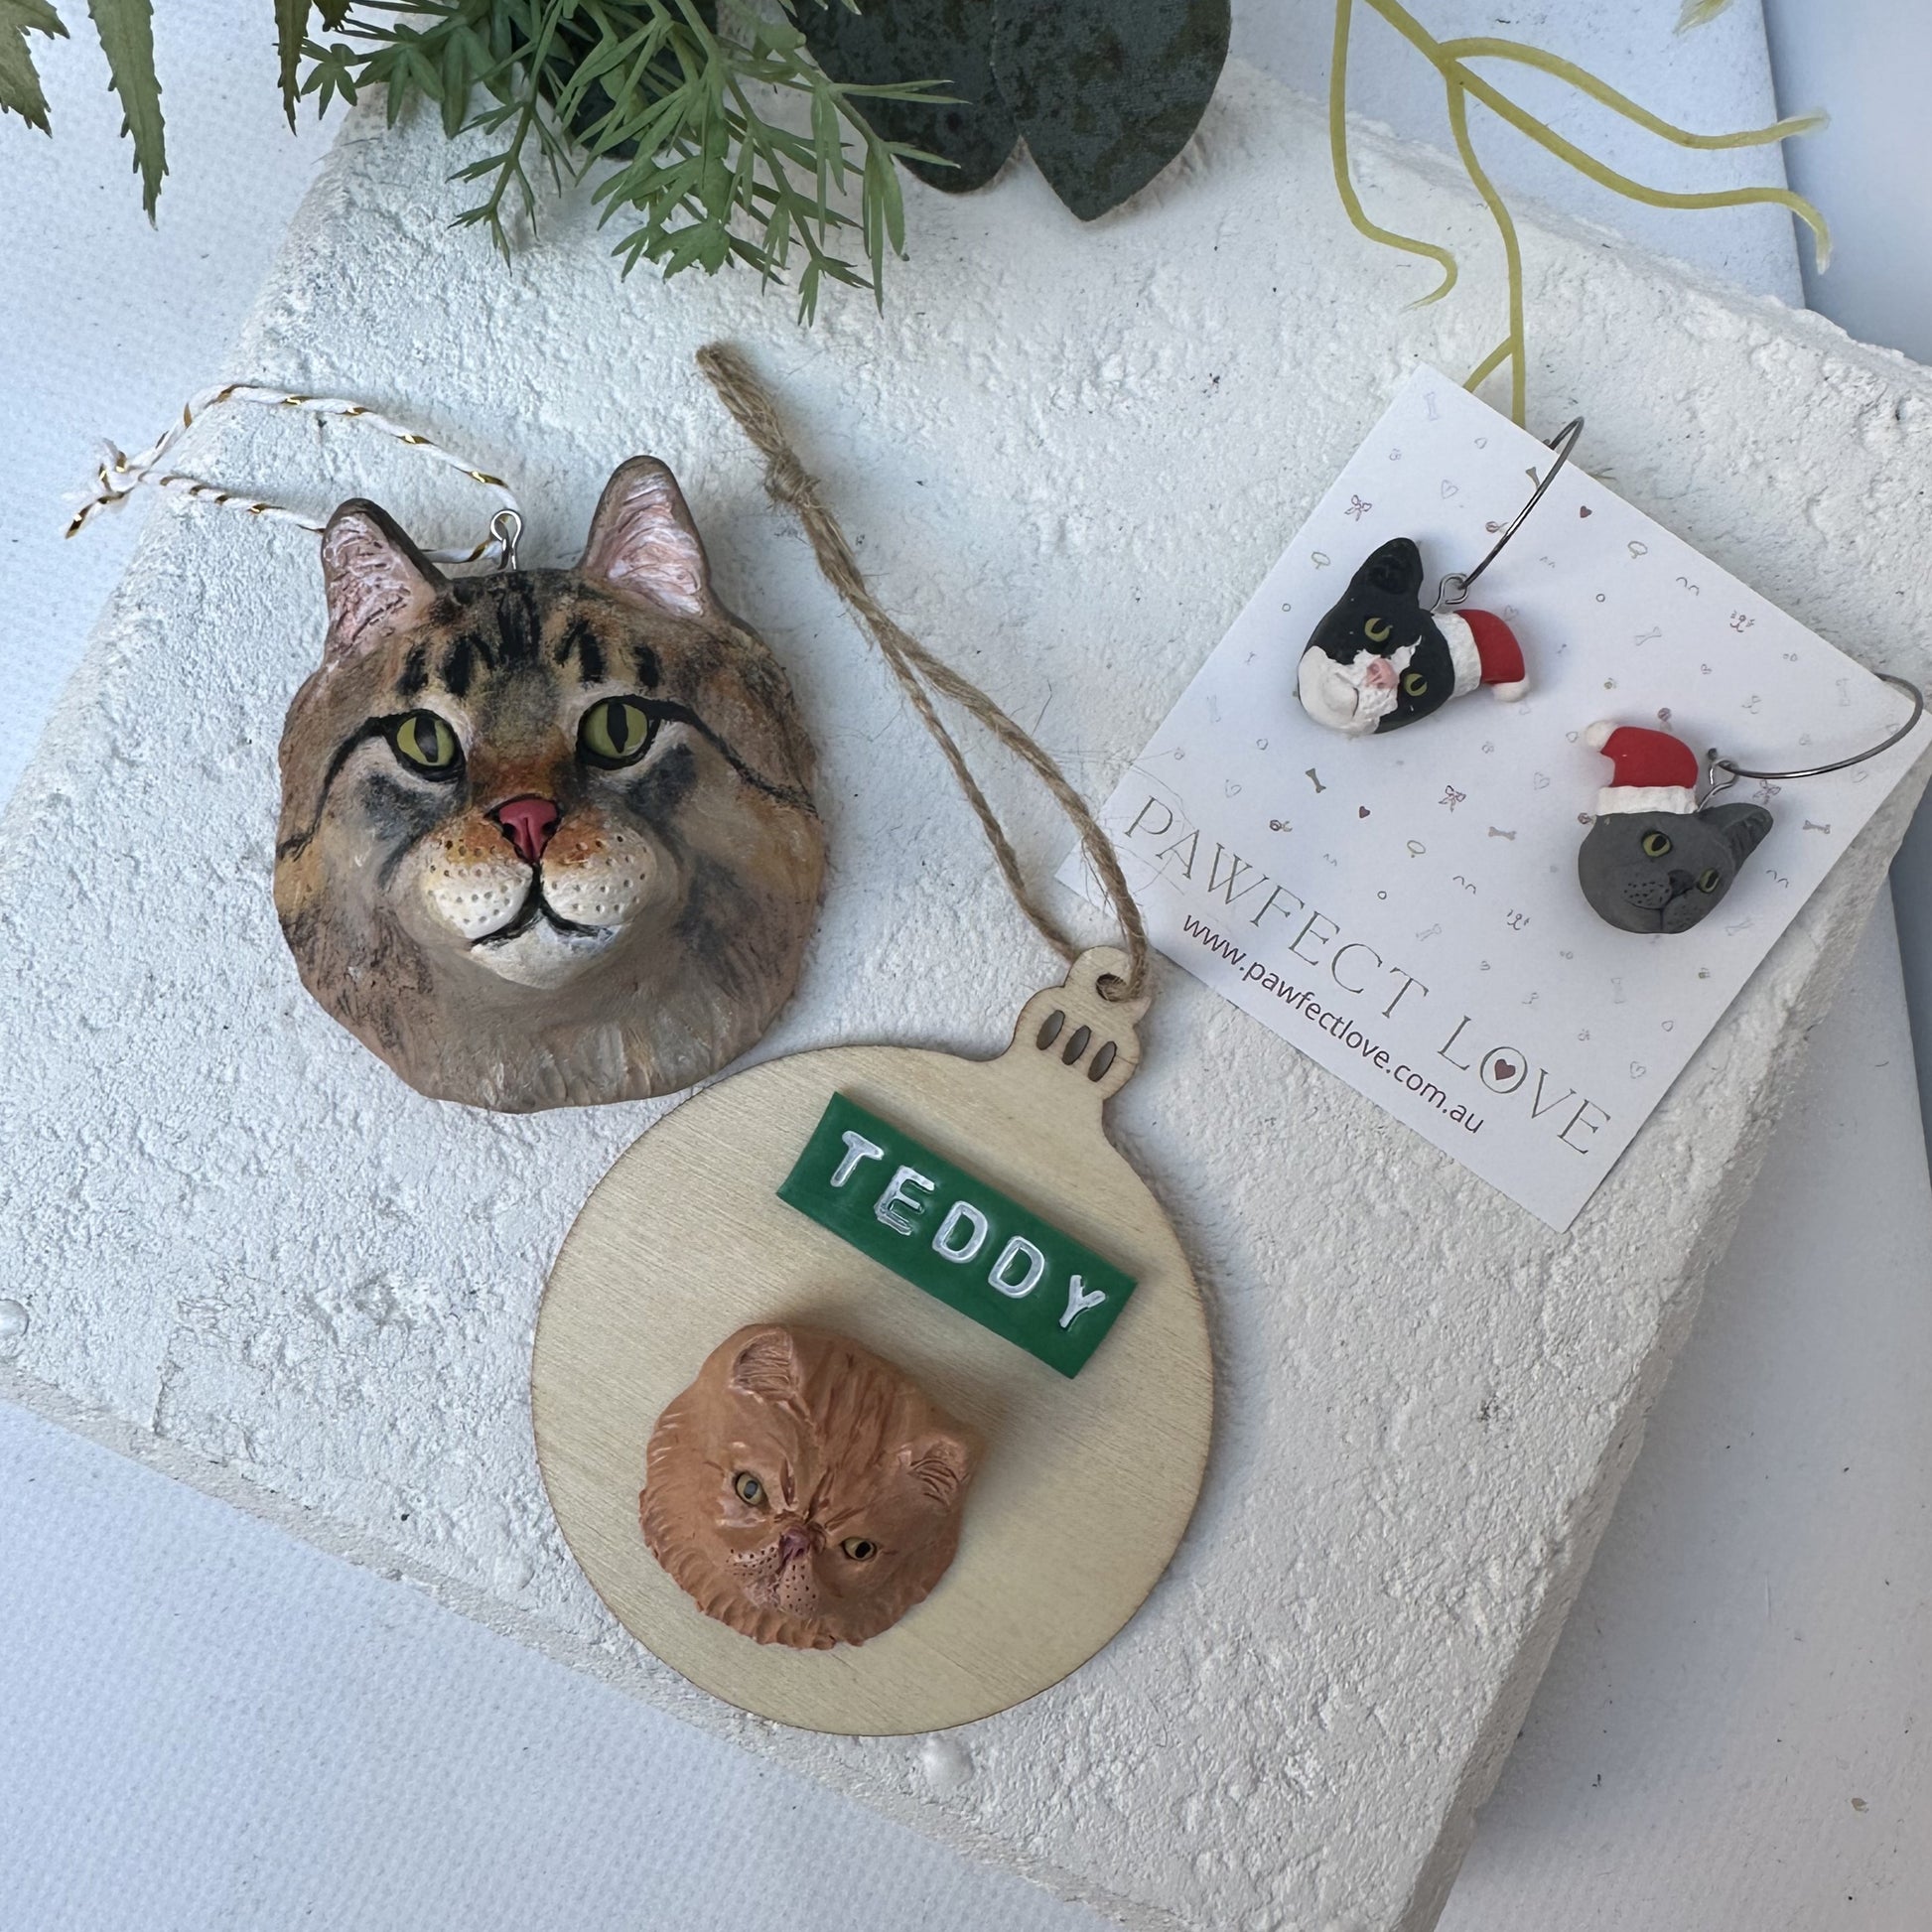 Group photo of cat face Christmas ornaments and earrings